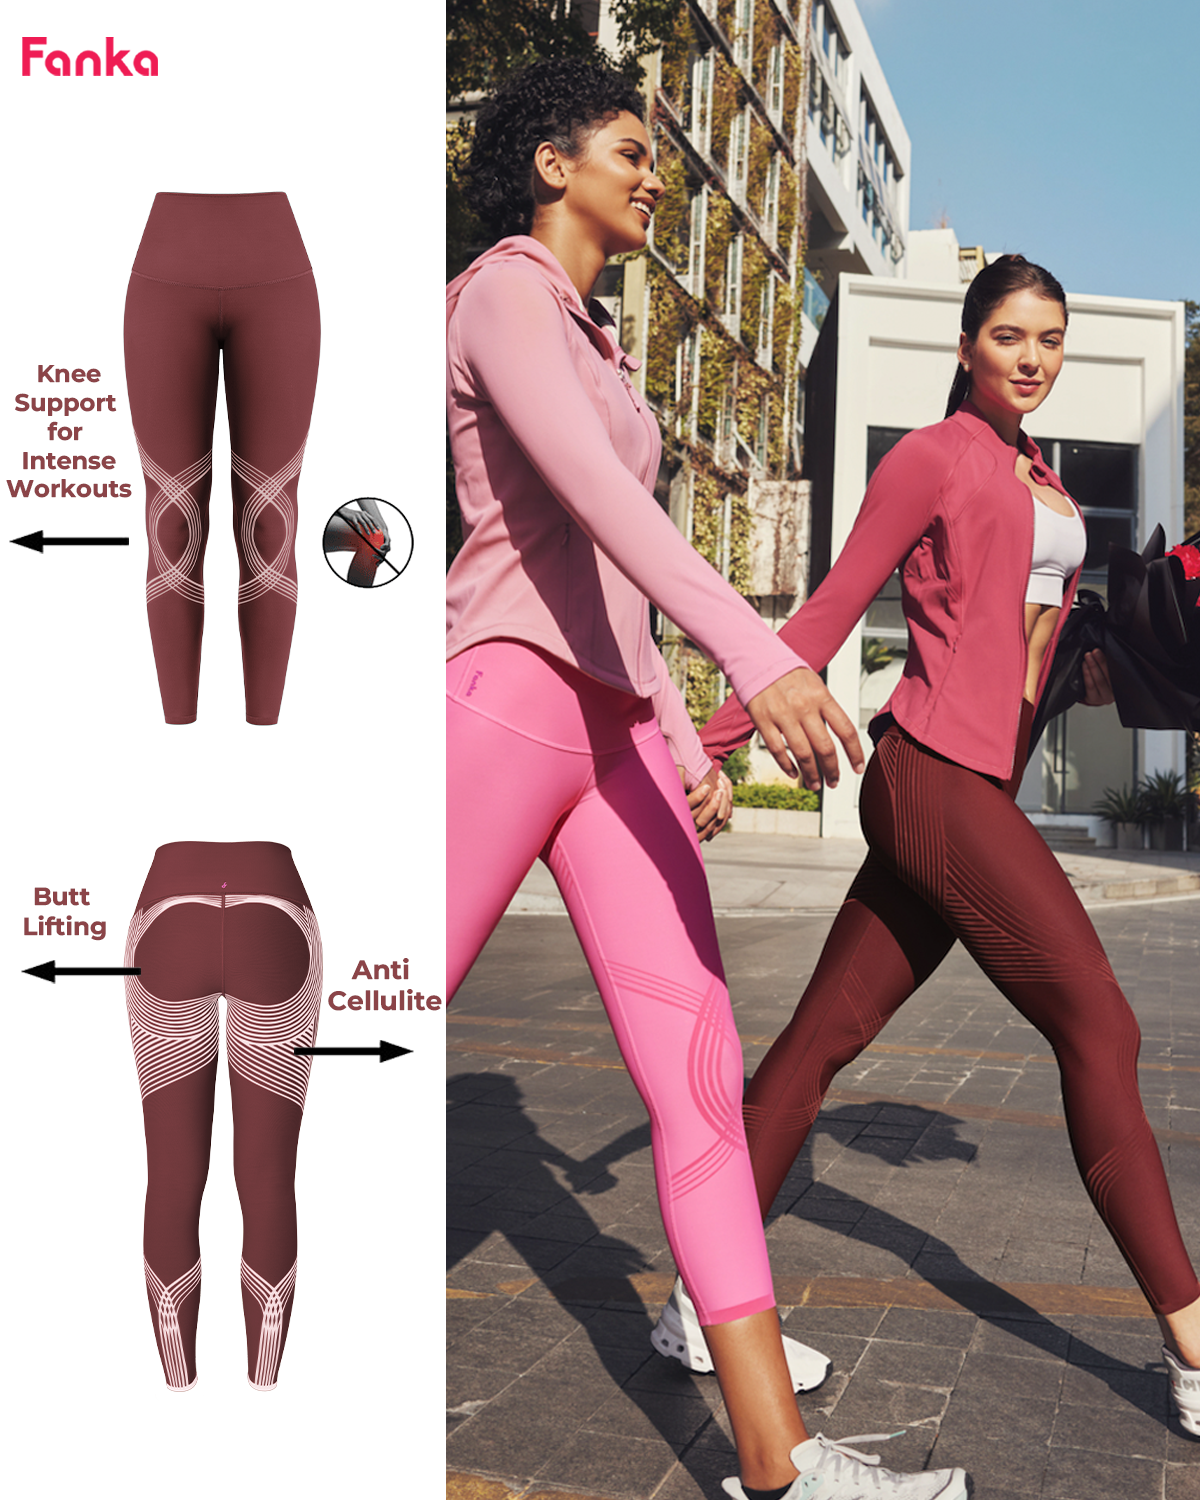 Fanka Leggings Private Sale Only For You